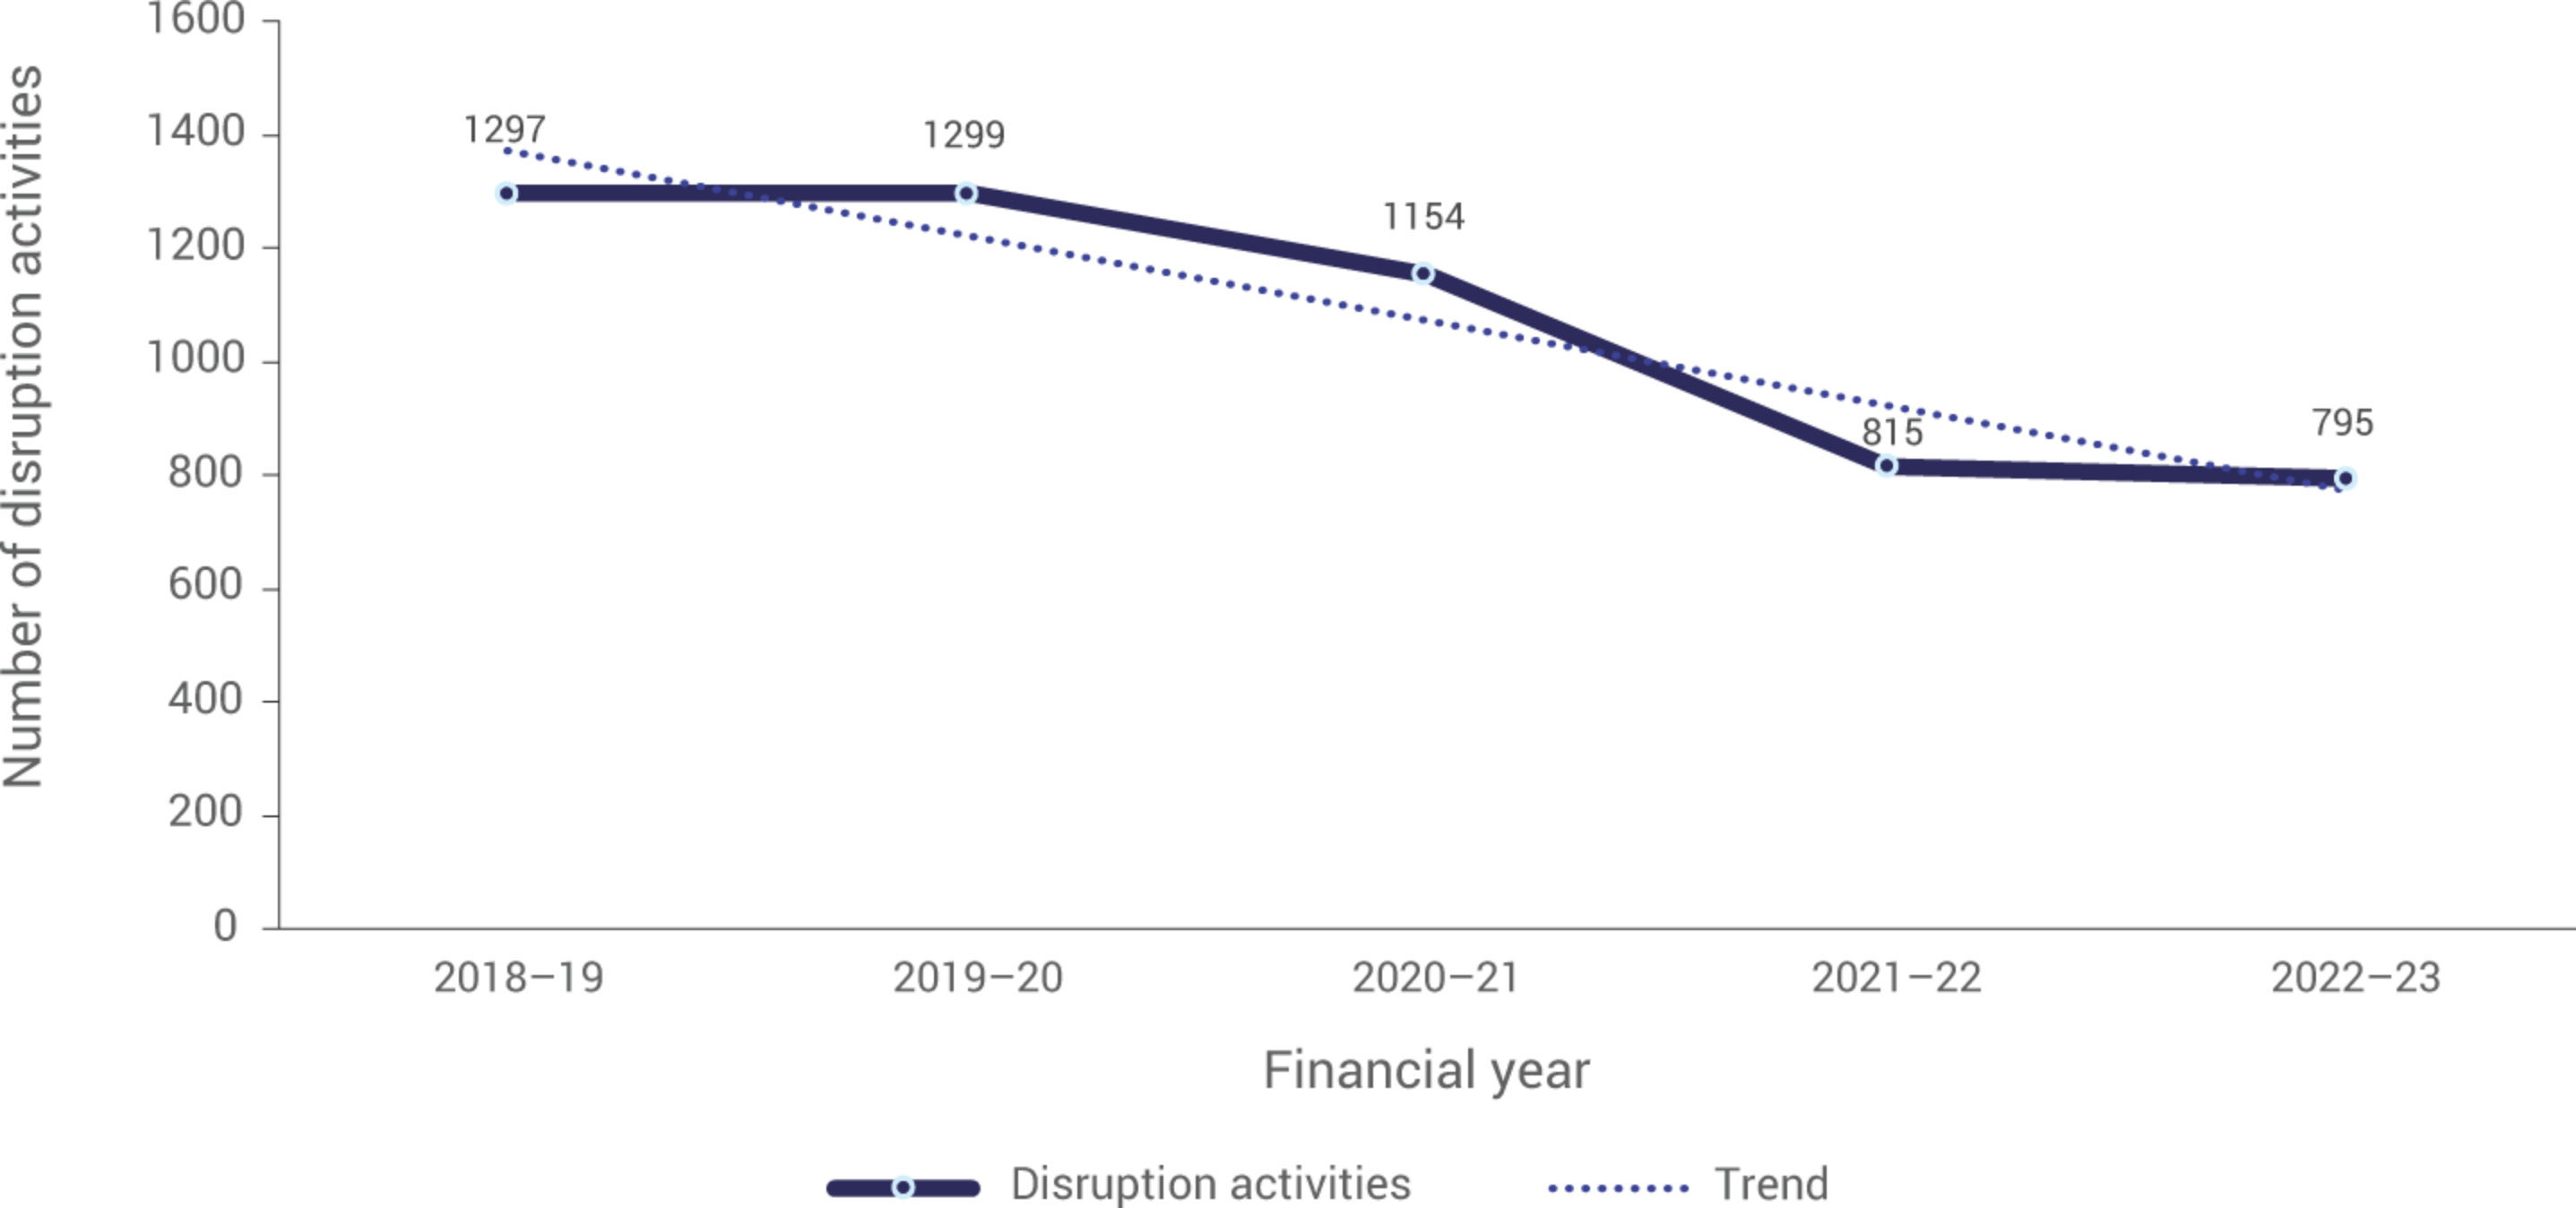 This Figure is a line graph depicting the number of disruption activities over a five-year period, from the 2018-19 financial year to the 2022-23 financial year.